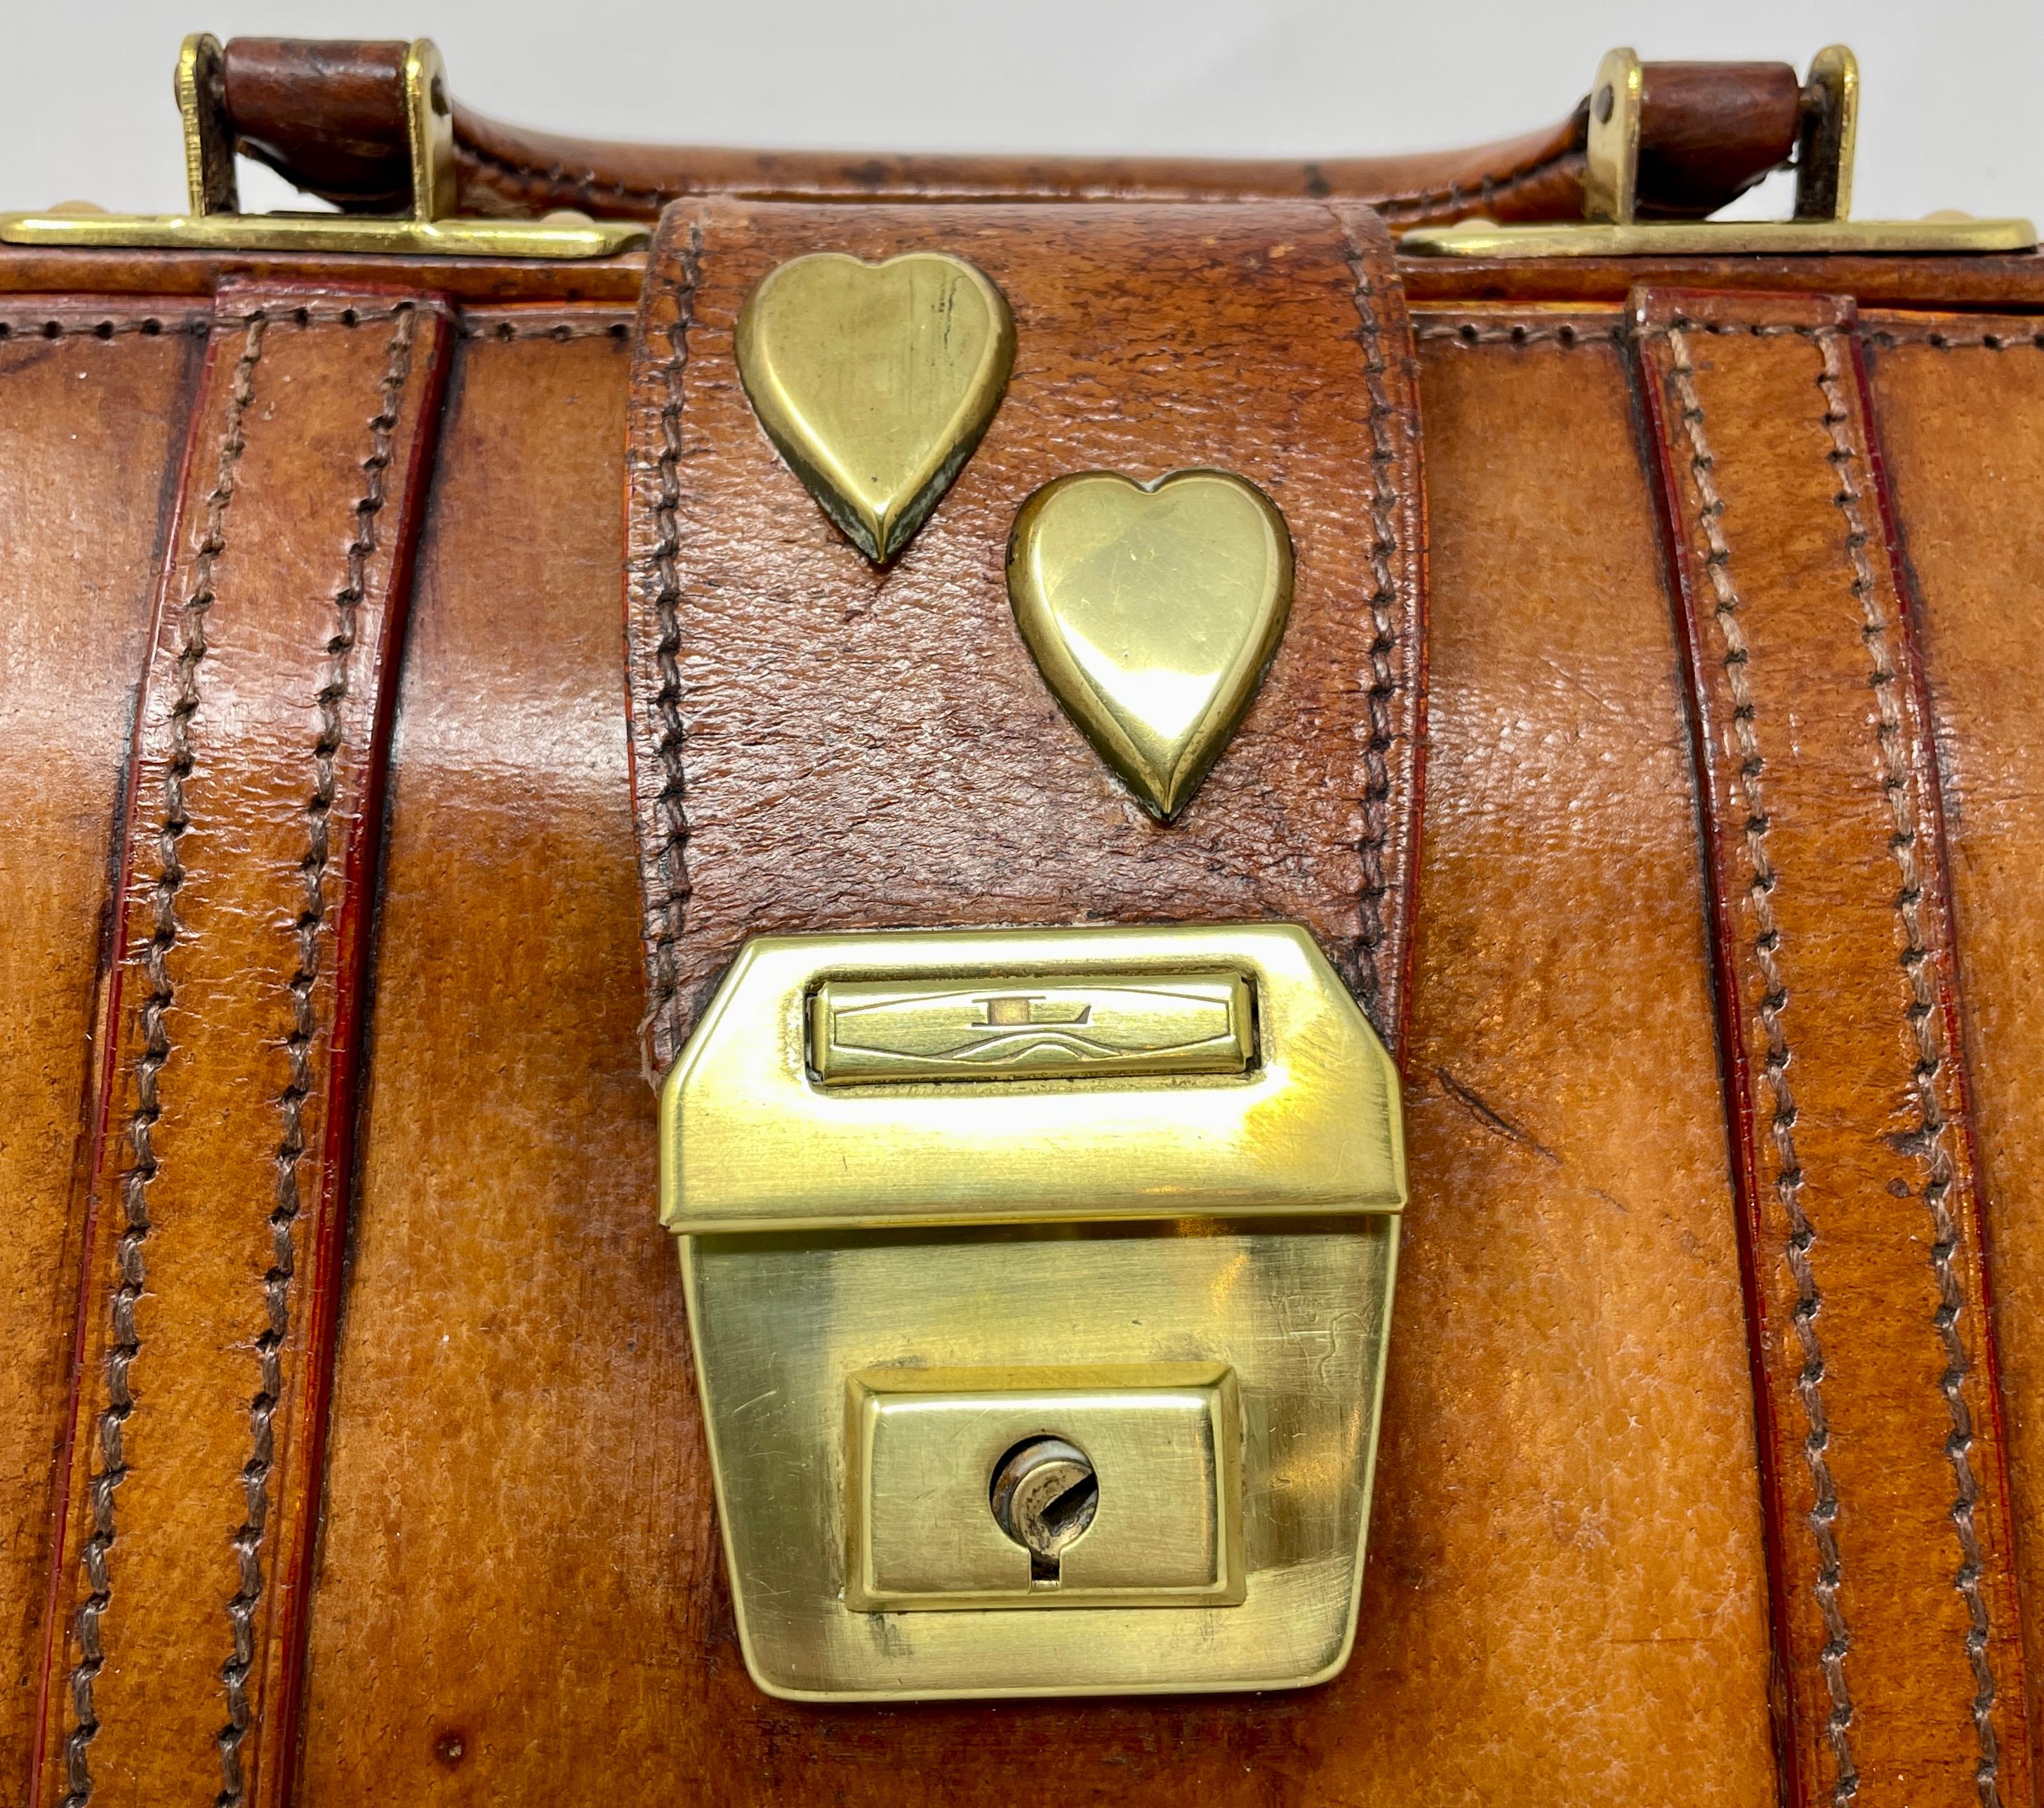 Antique British military leather satchel bag with 2 brass hearts, circa 1900. The hearts specifically associate with love of country.